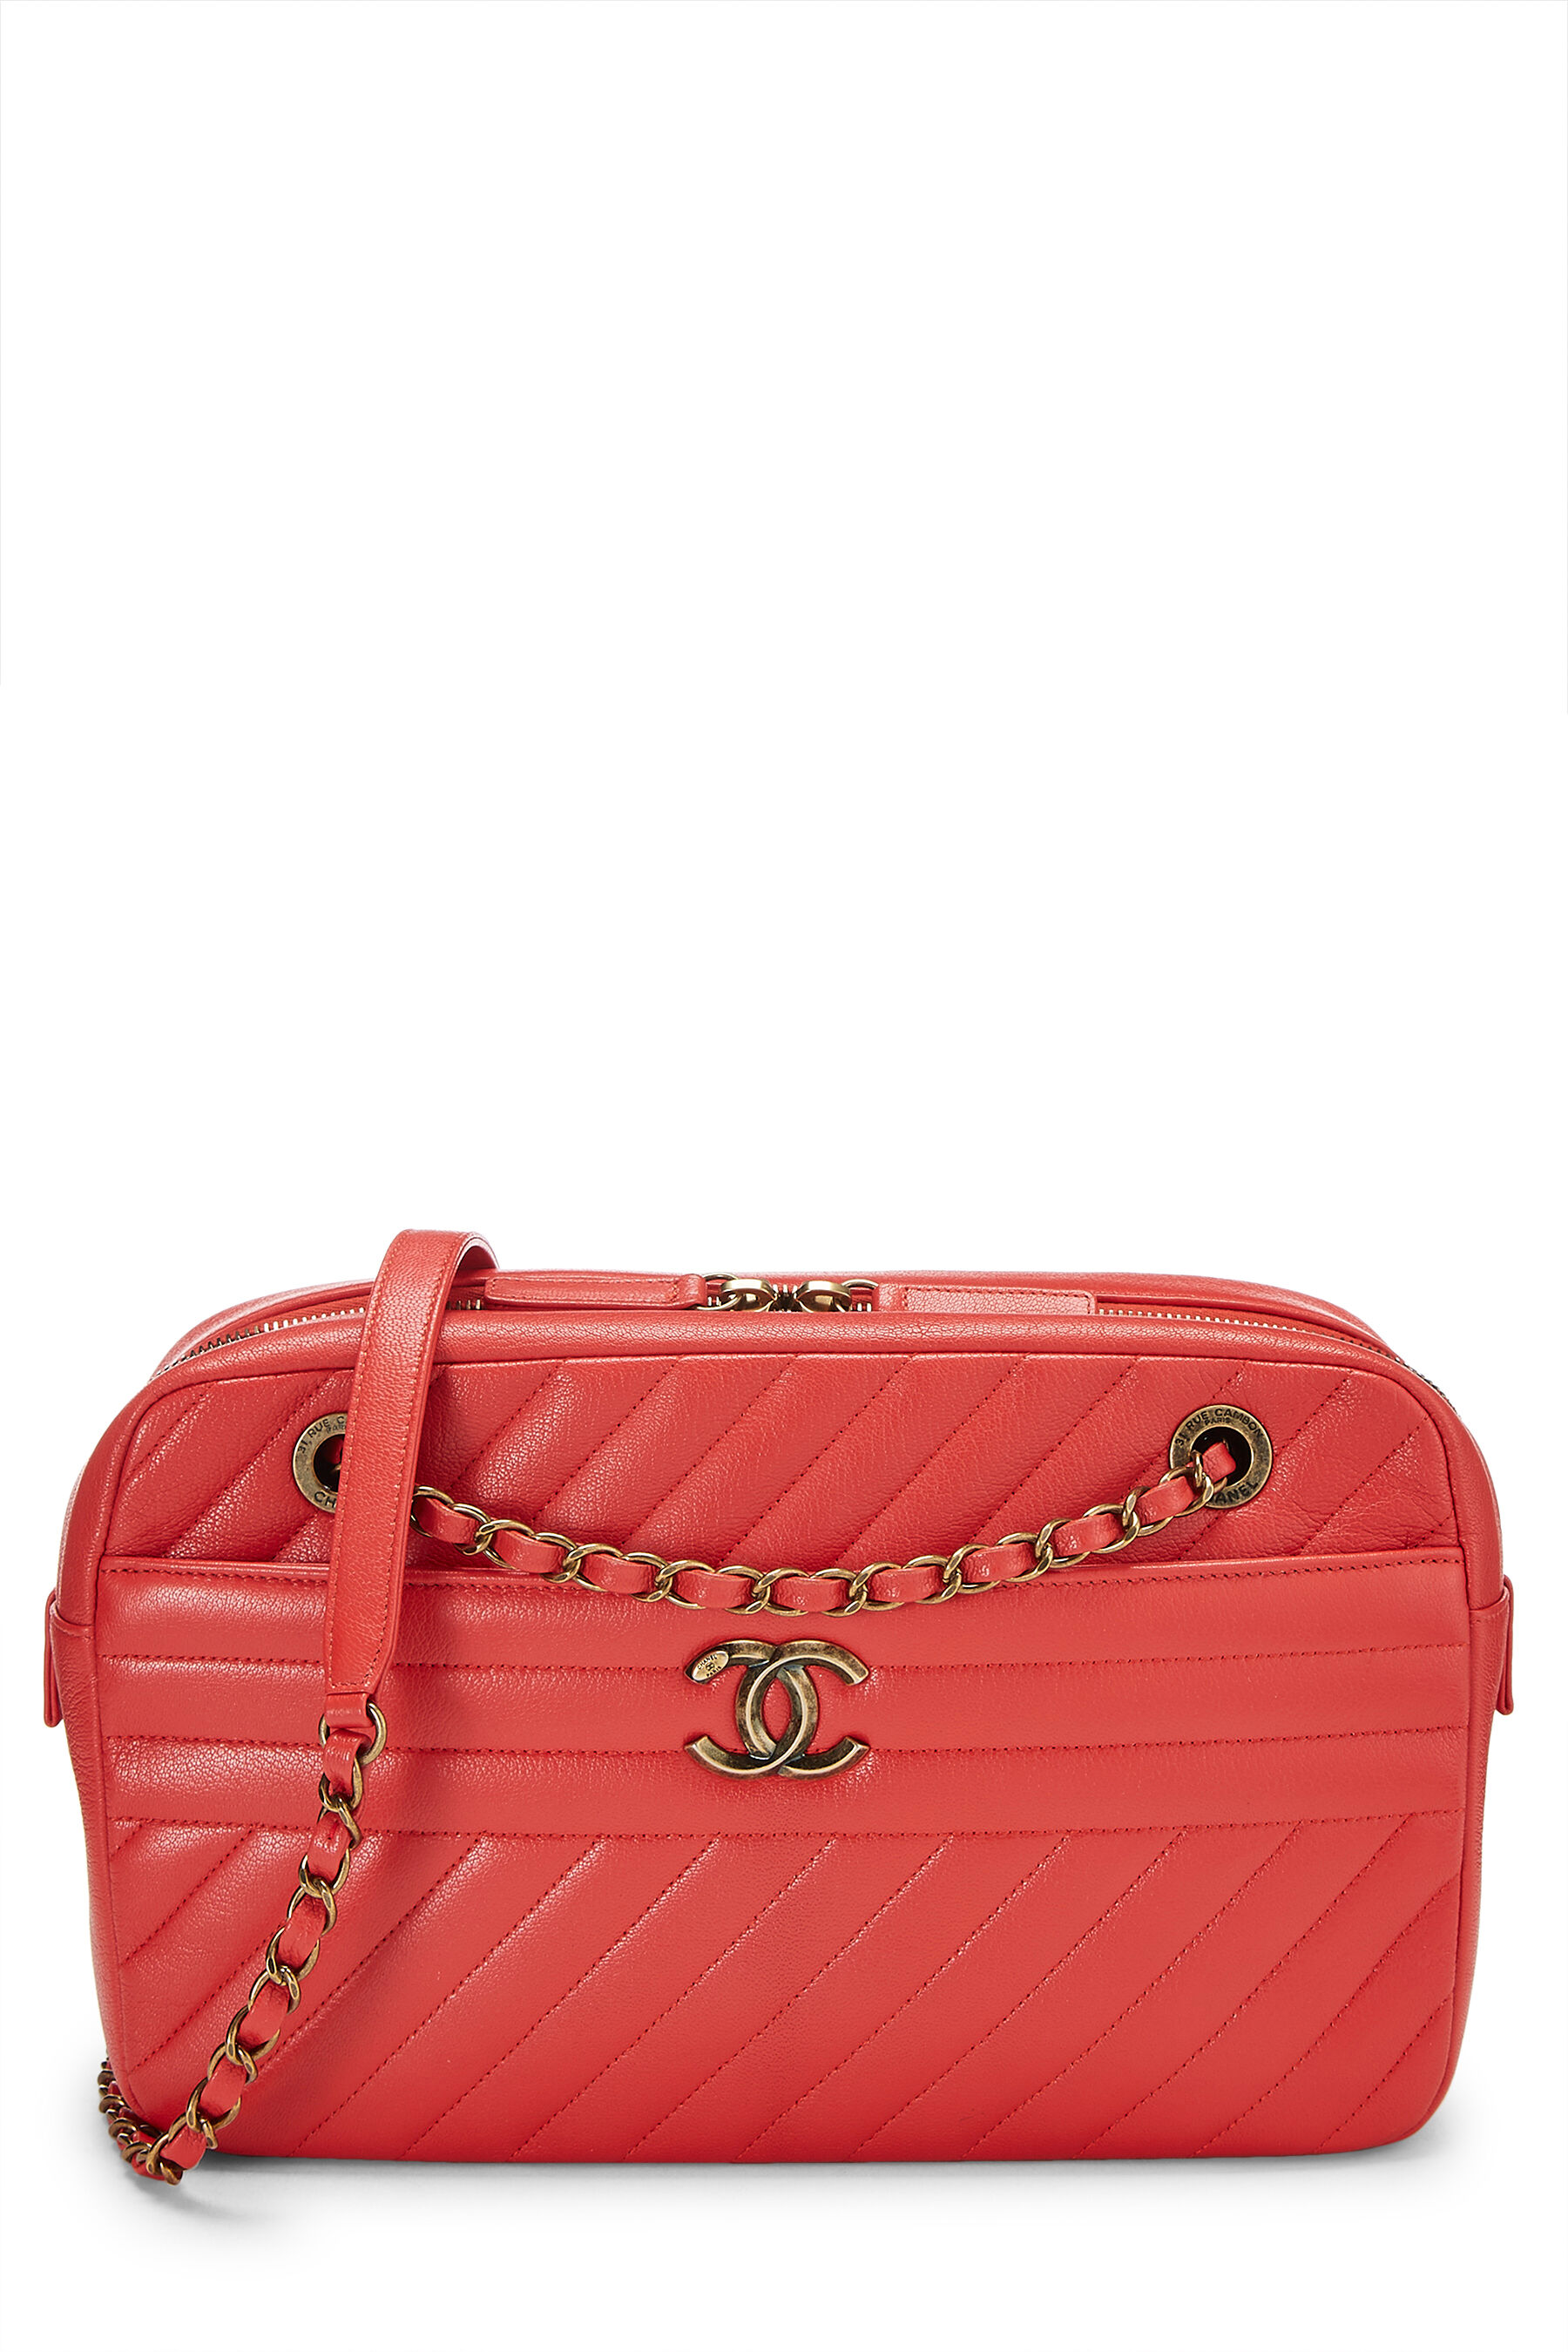 Chanel - Red Quilted Lambskin Diagonal Camera Bag Large